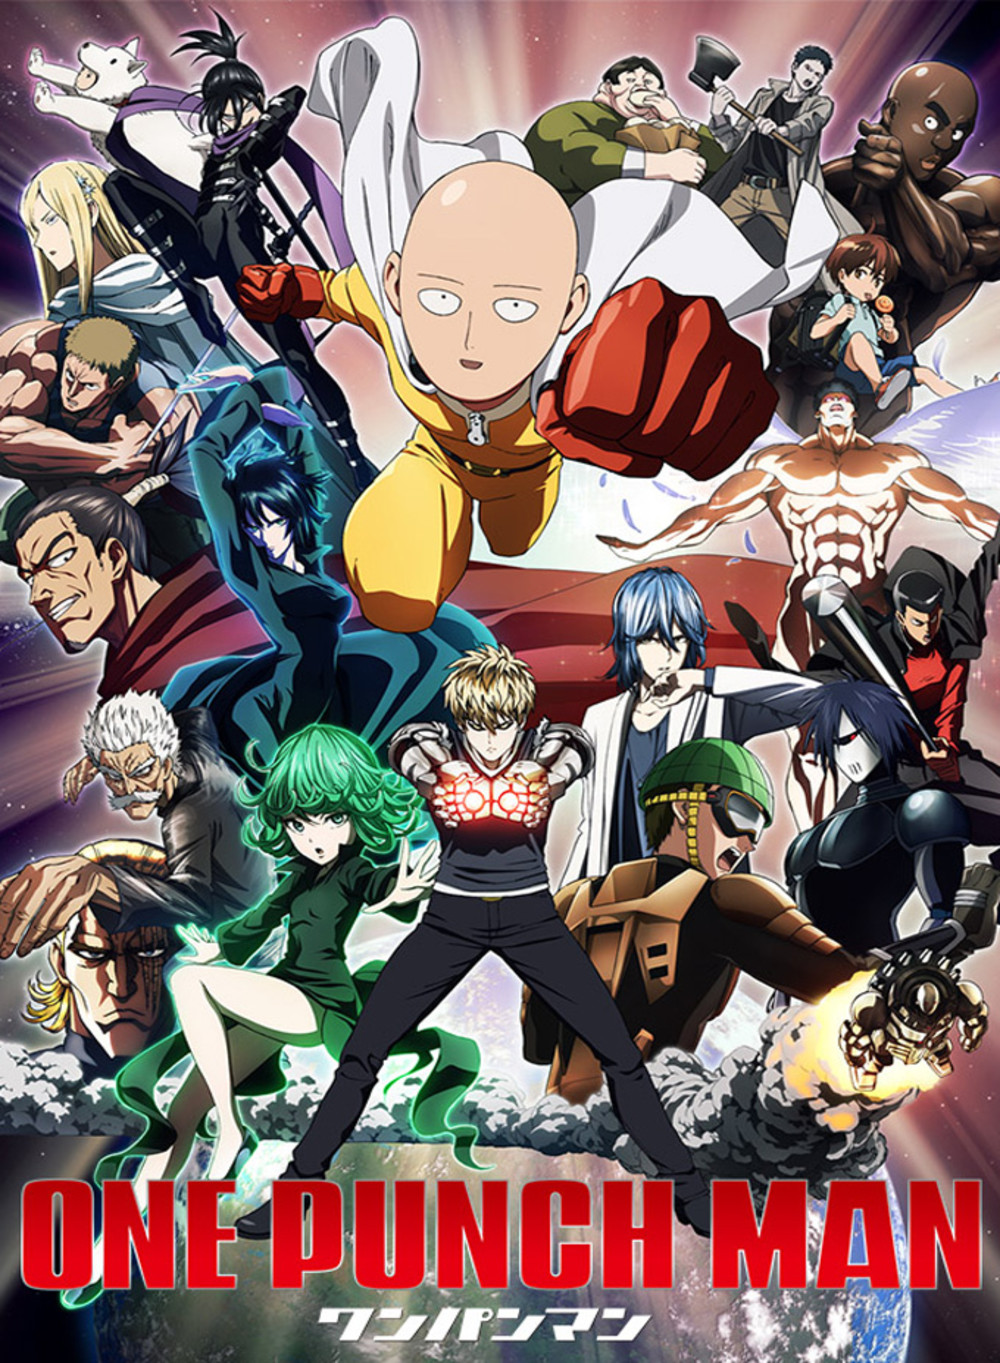 One-Punch Man Season 3: Cast, Release Date Timeline, And More